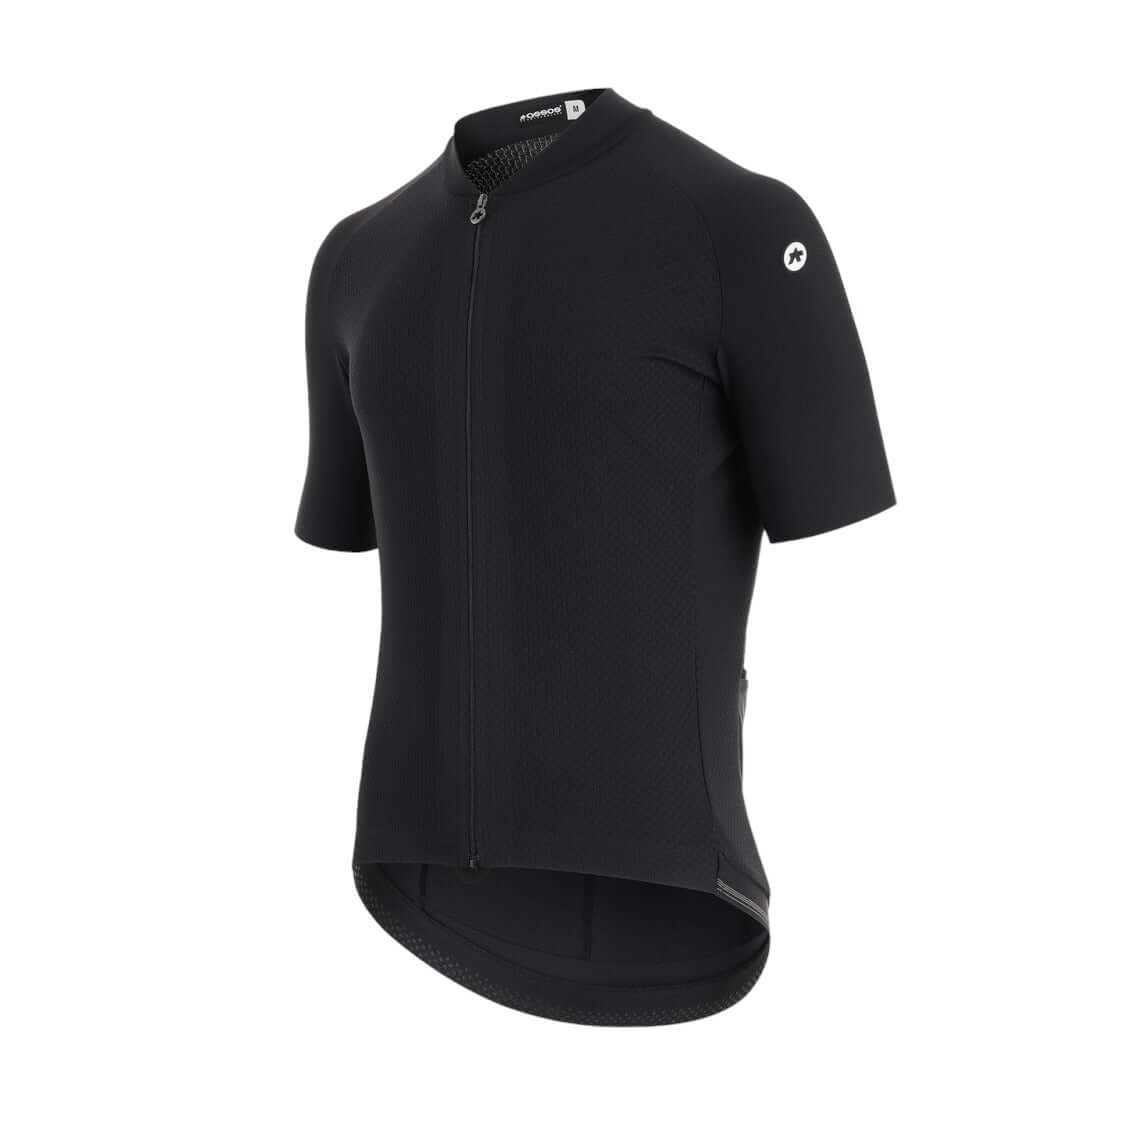 Assos of Switzerland Mille GT Jersey C2 EVO | Strictly Bicycles